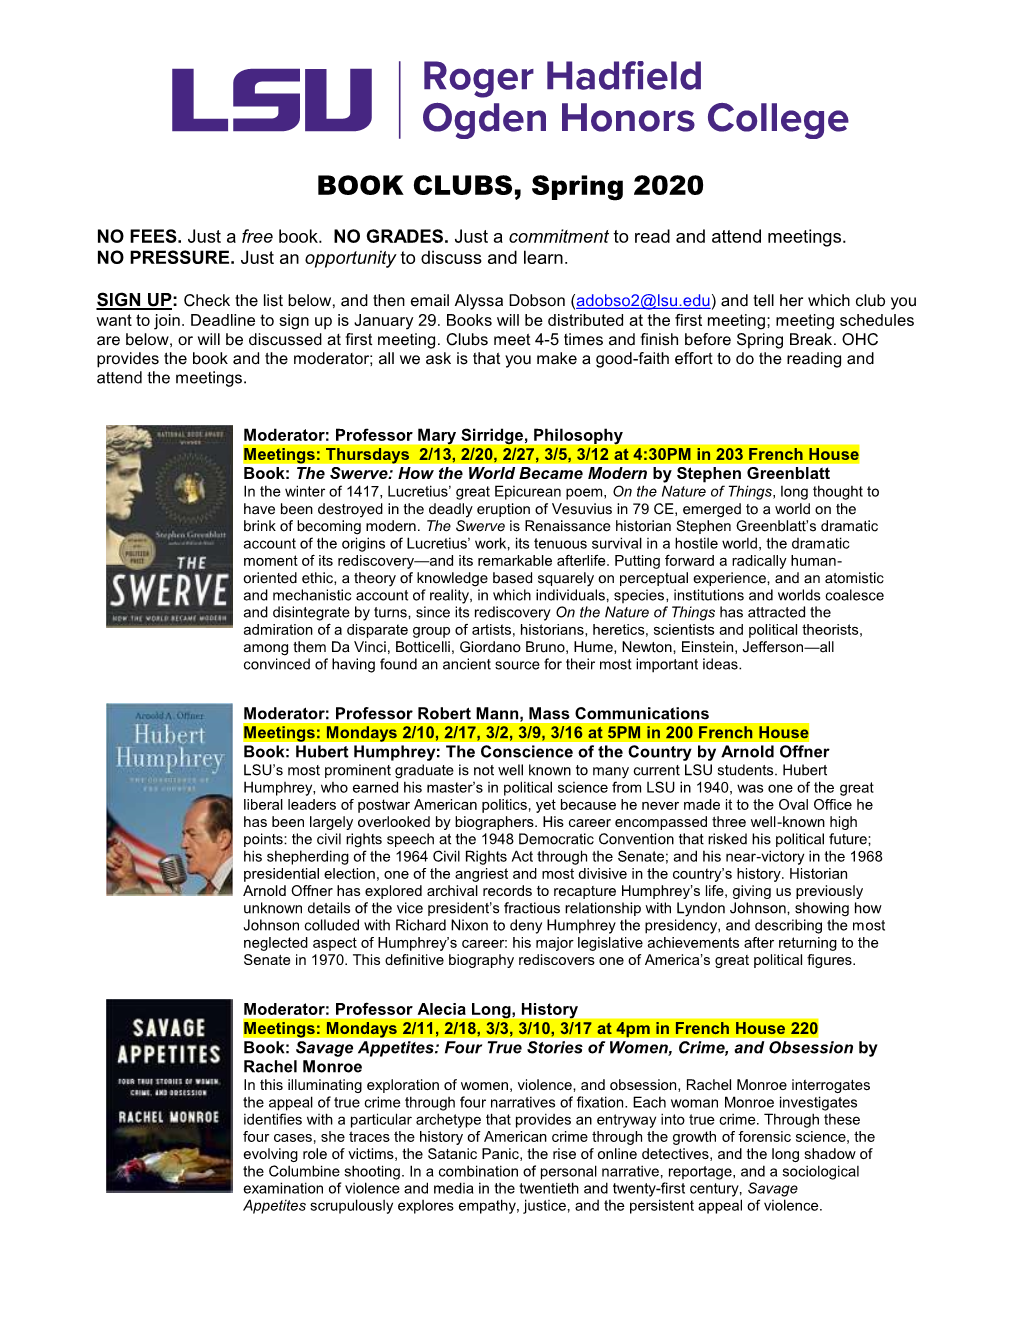 OHC Book Clubs Spring 2020